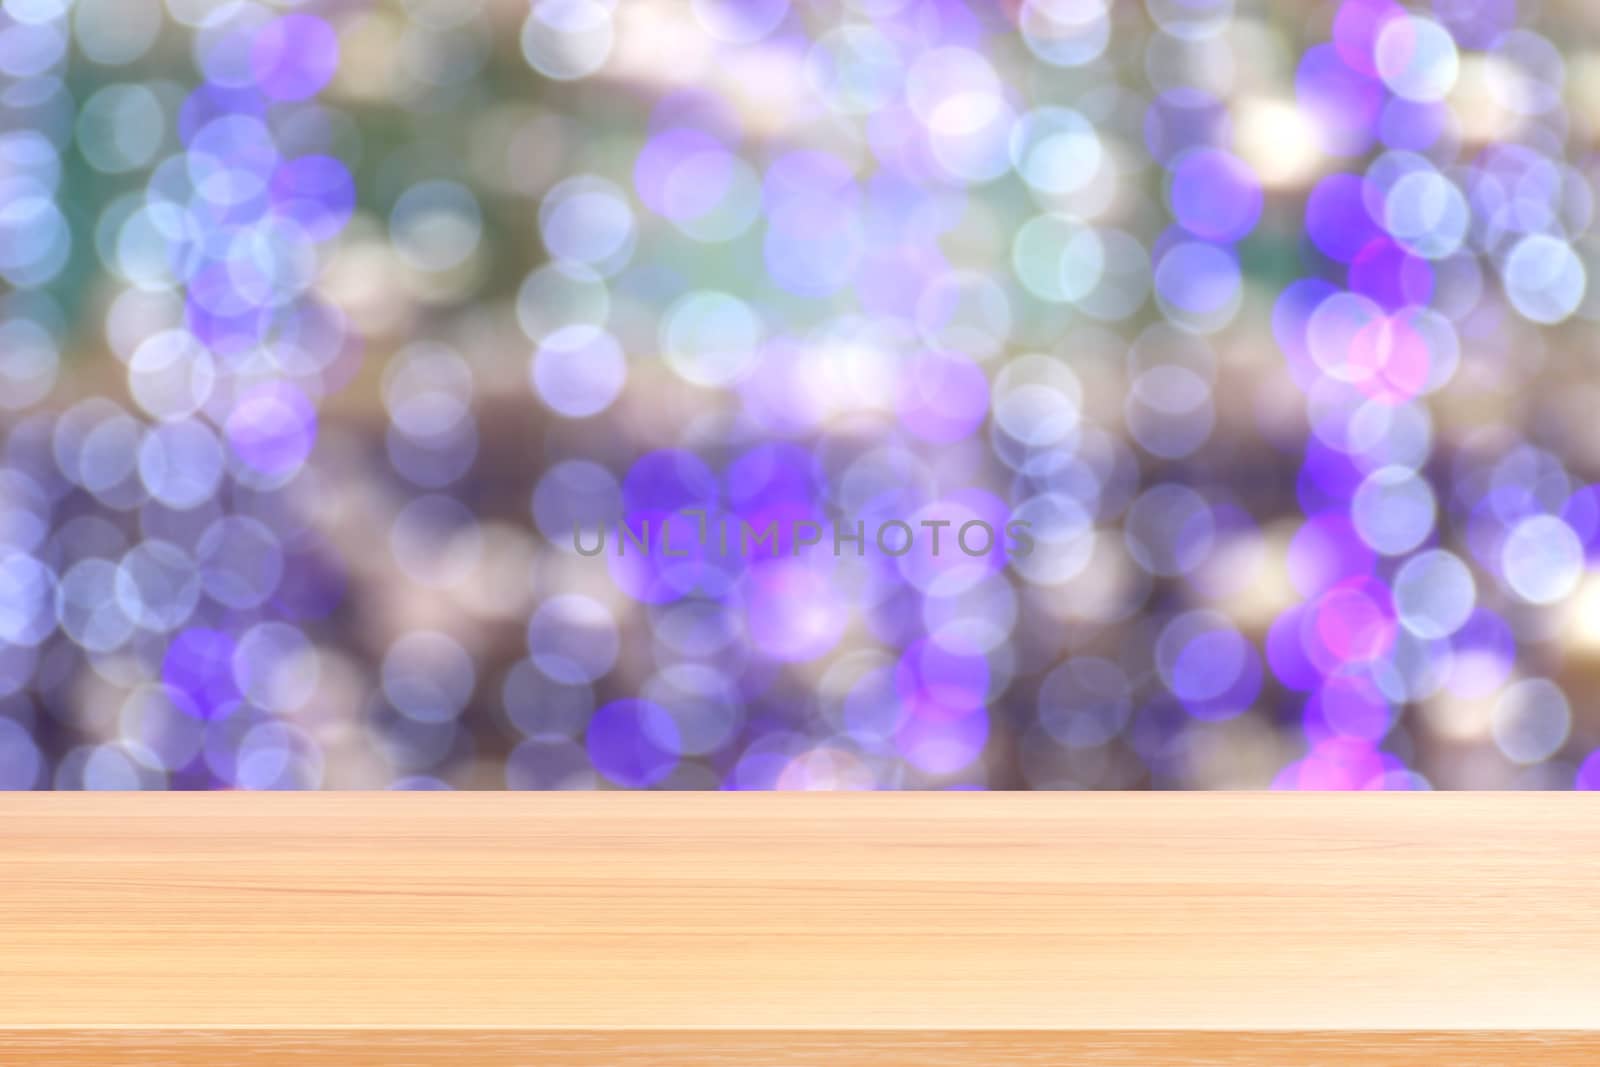 wood plank on bokeh purple lighting vivid colorful abstract background, empty wood table floors lighting decoration in shopping mall, wood table board empty front violet bokeh glitter interior light by cgdeaw